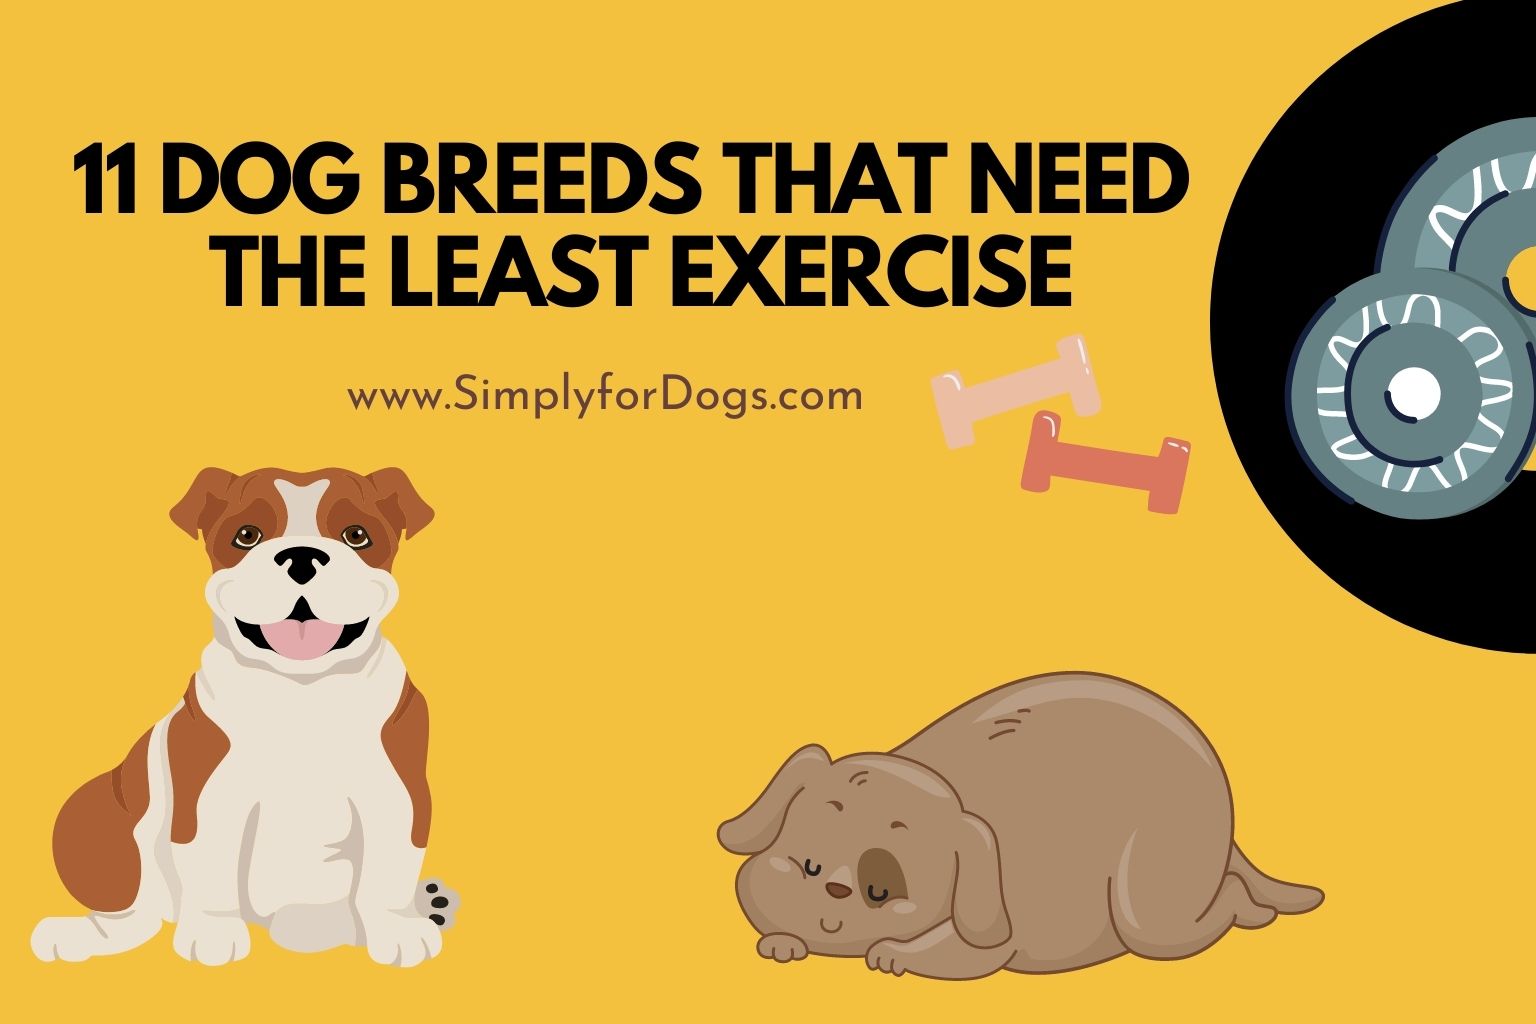 11 Dog Breeds That Need the Least Exercise